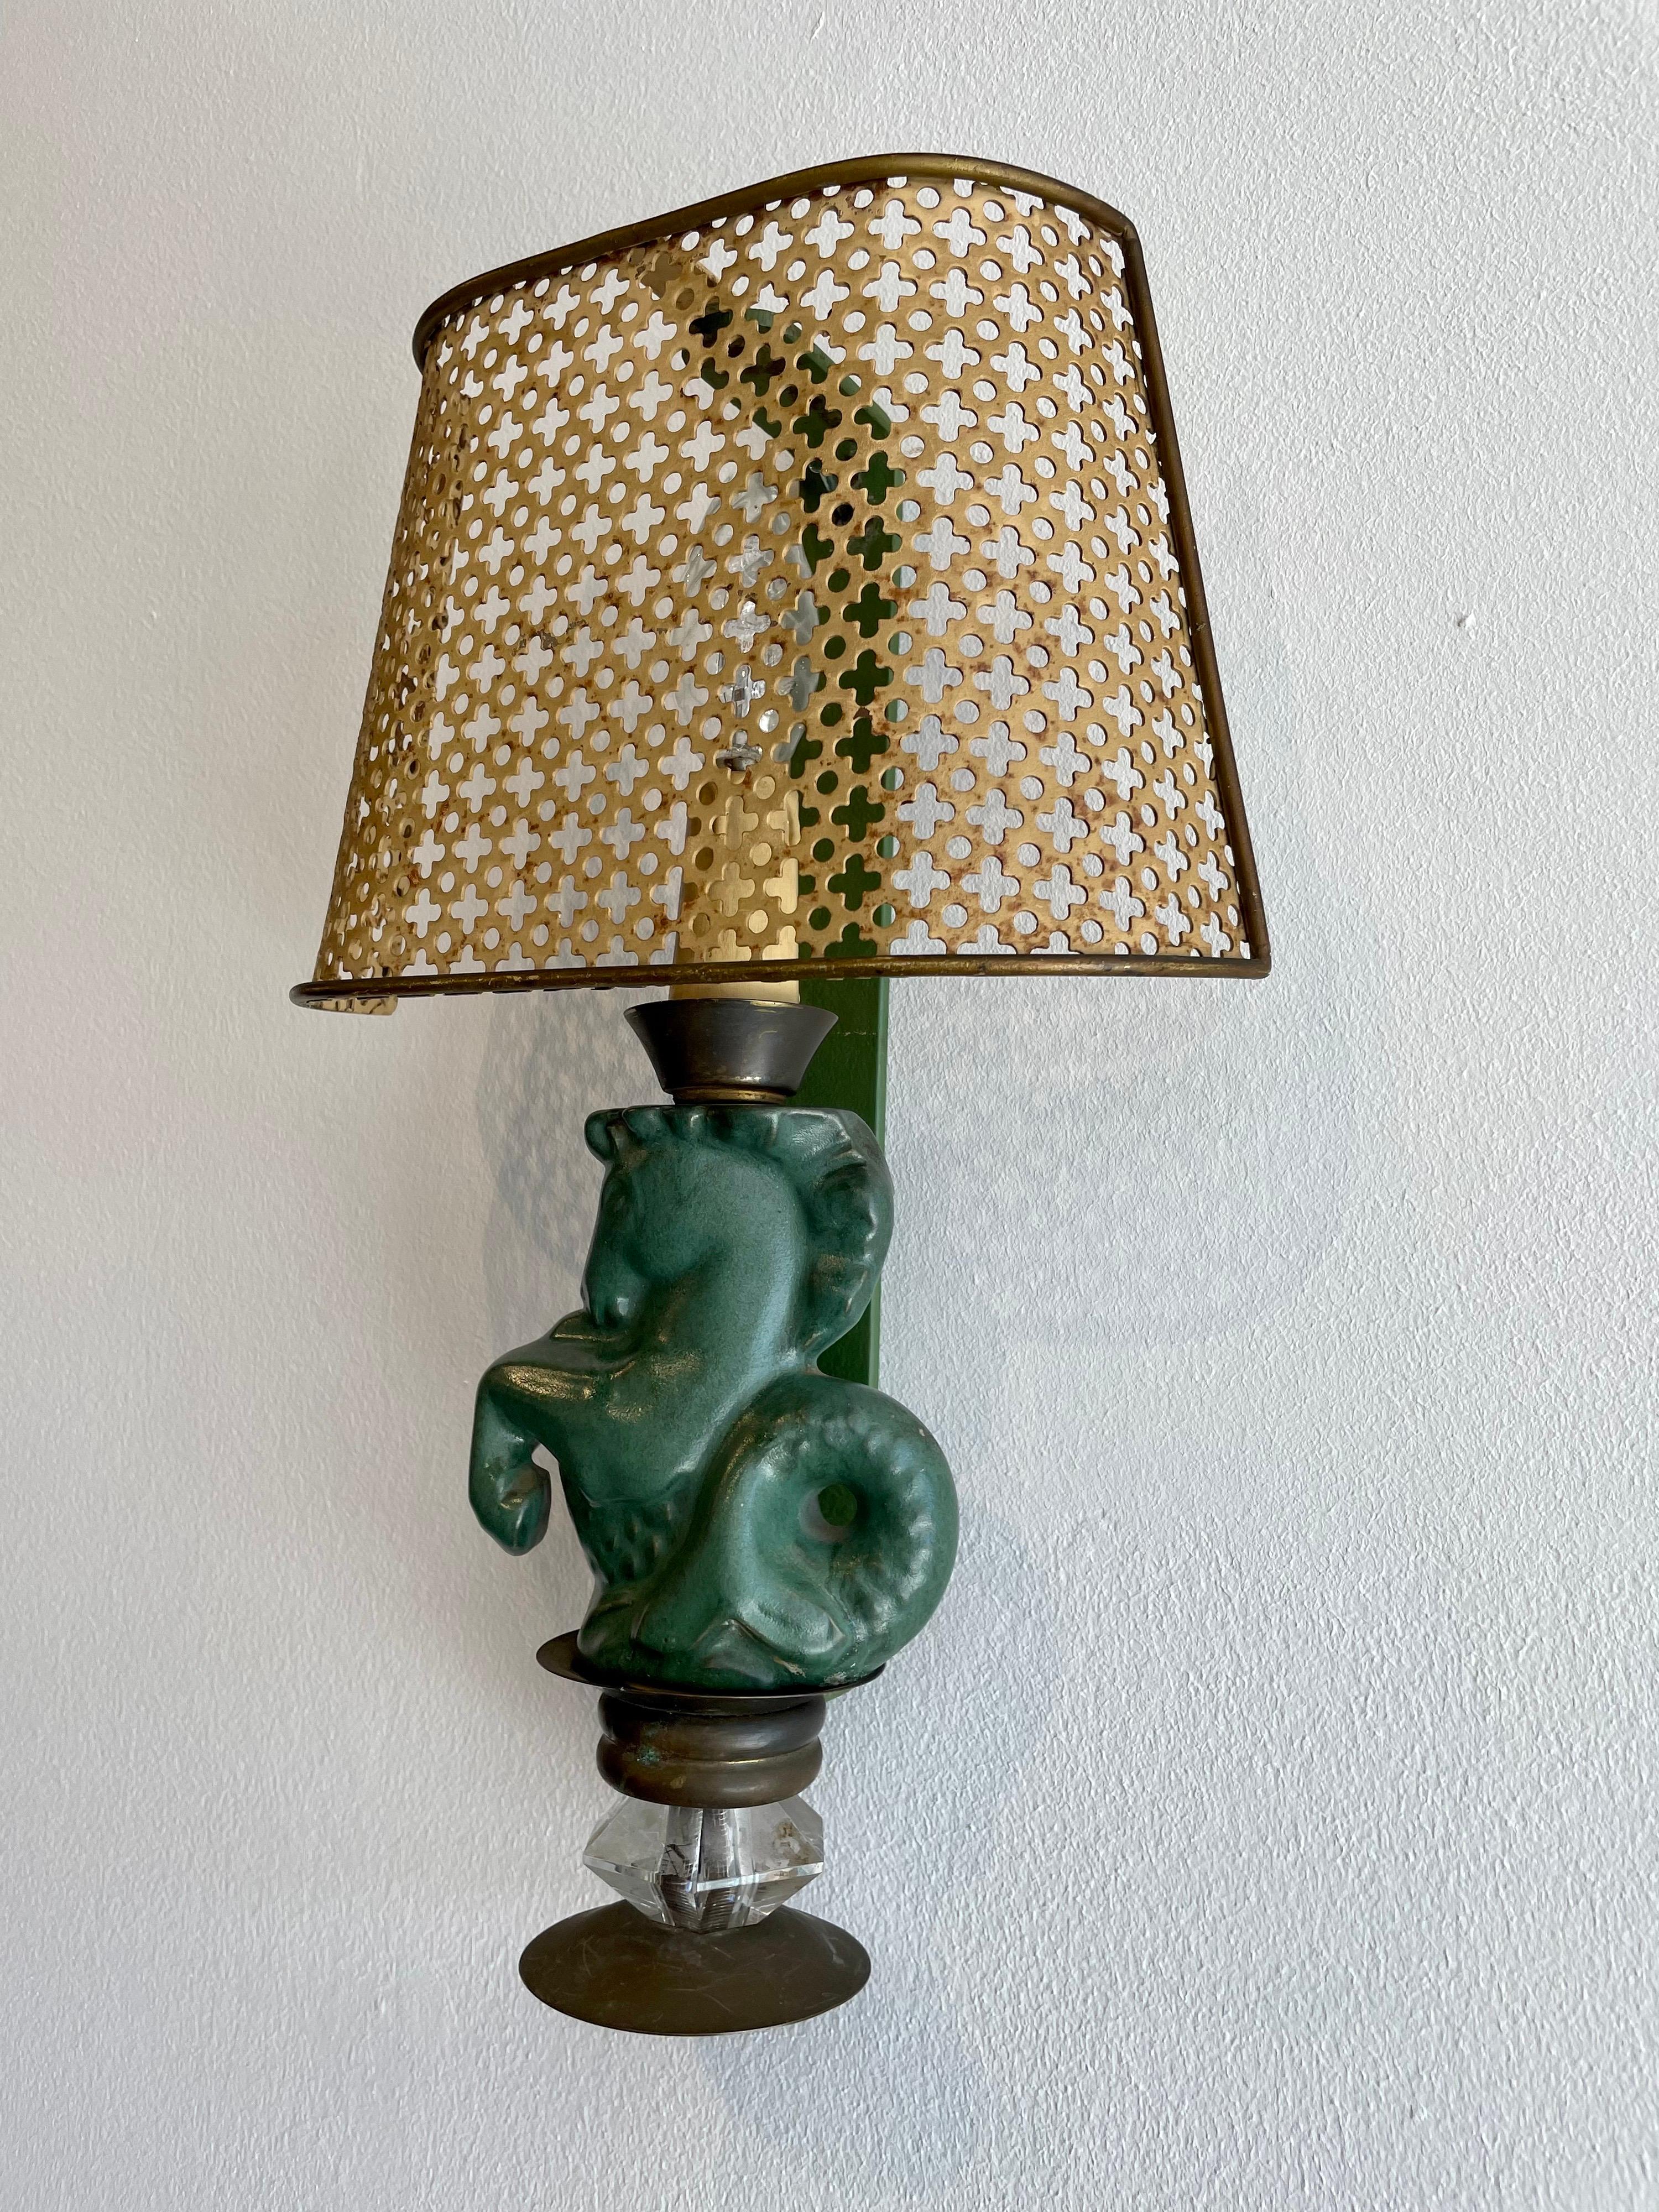 Collaboration of Maison Asselbur and famed ceramic artist, Georges Jouve (1910-1964) with Mathieu Mategot mesh shade. This French modernist wall sconce made in the 1950's is the result of George Jouve collaboration with Asselbur including a Mategot